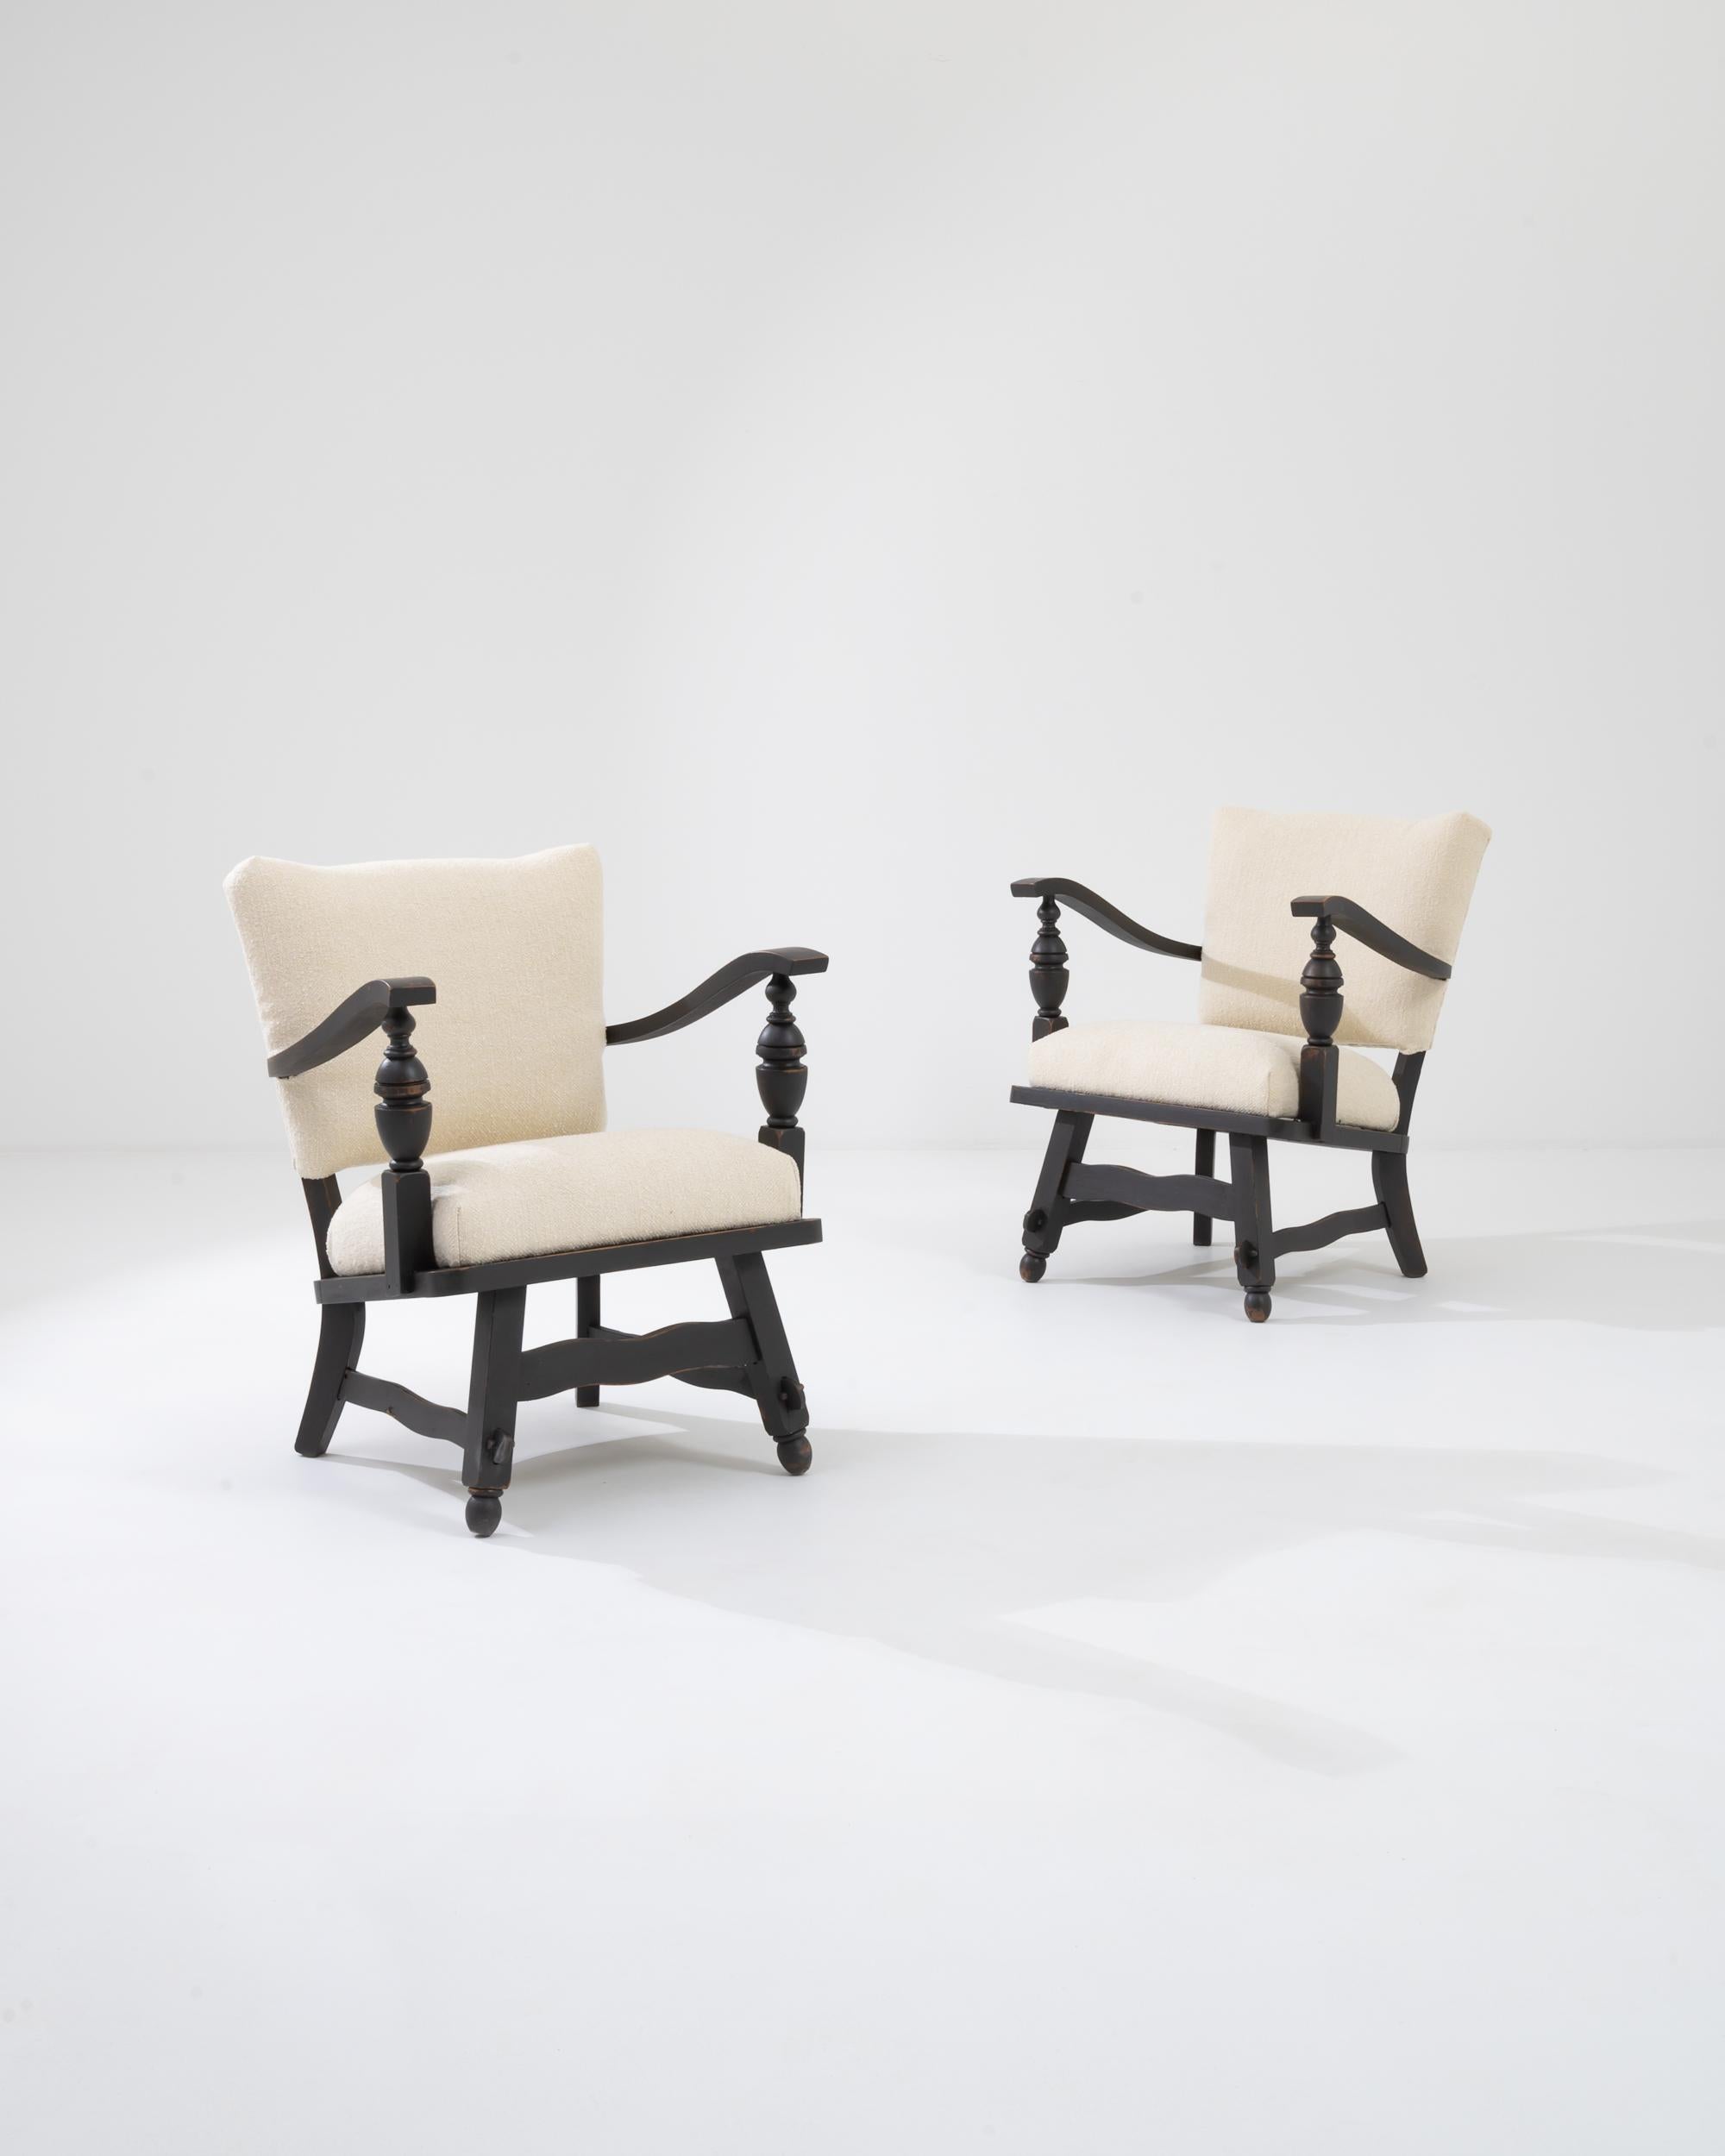 A pair of wooden upholstered armchairs from 20th century Belgium. Sculptural supports have been expertly turned on a lathe, dramatically swooping arms, and gently waving legs further define these charming farmhouse style chairs. Their sturdy,